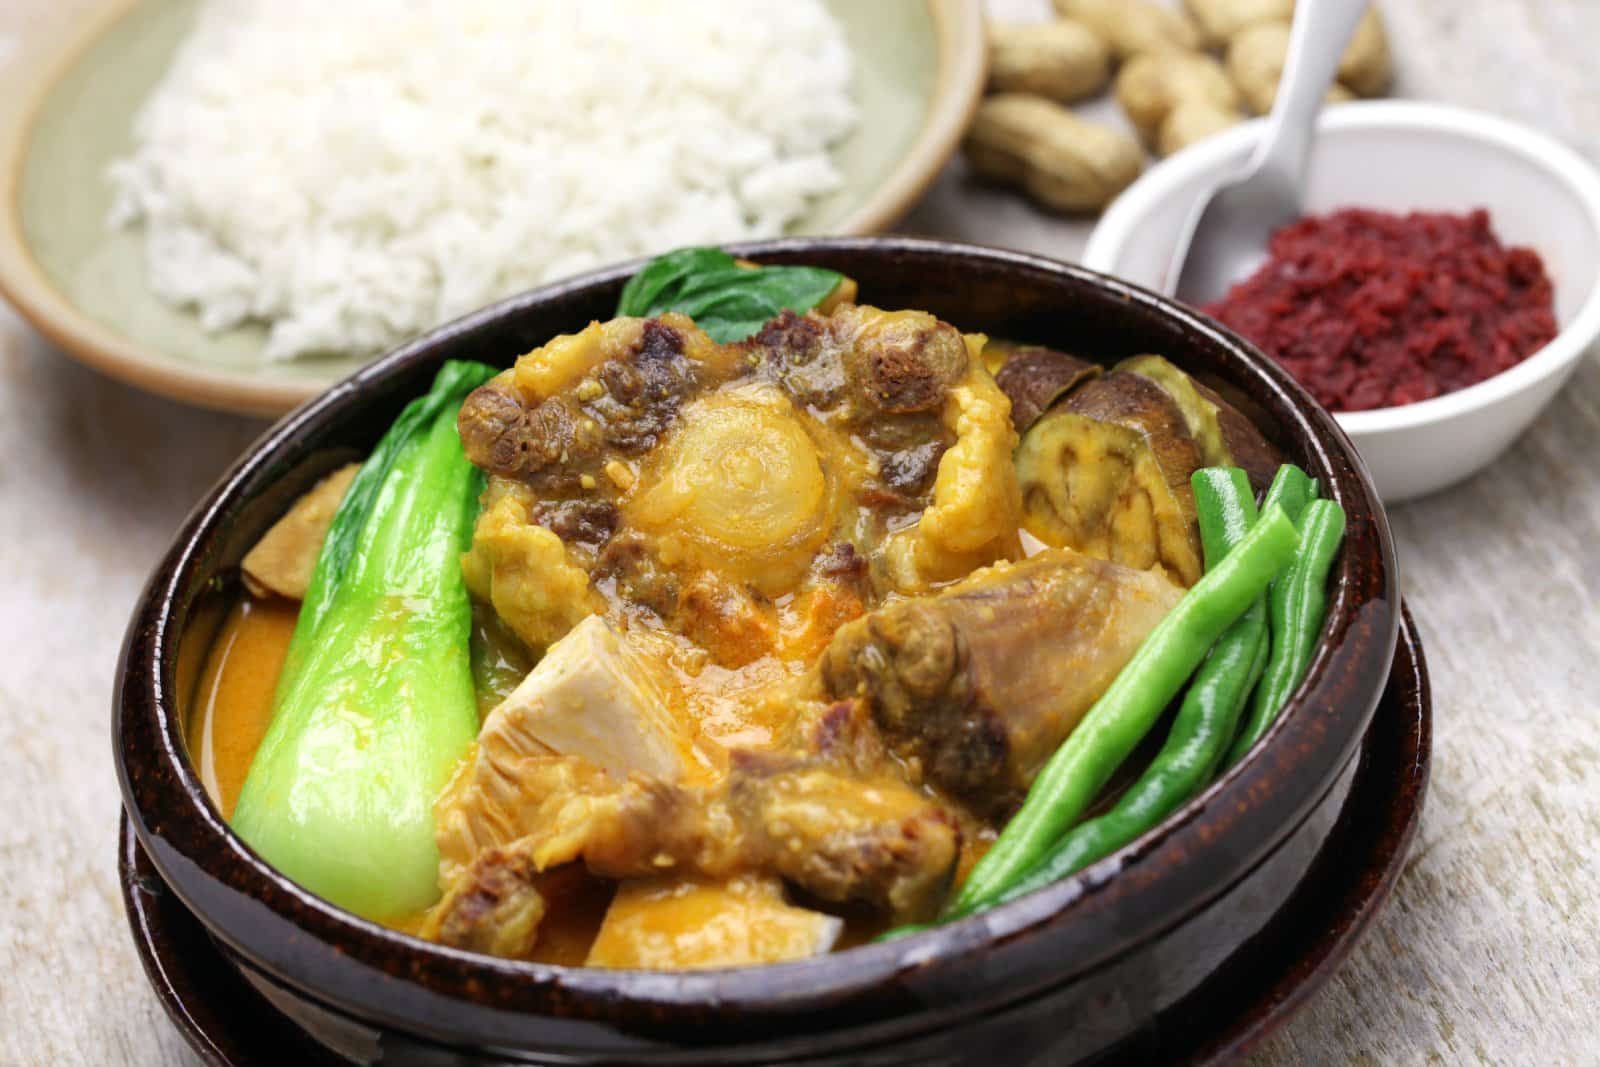 <p class="wp-caption-text">Image Credit: Shutterstock / bonchan</p>  <p><span>Filipino cuisine is a melting pot of influences, blending indigenous, Spanish, Chinese, and American culinary traditions. The result is a unique flavor profile that balances sweet, sour, and salty. Dishes such as Adobo, a marinated meat stew, and Sinigang, a sour soup, exemplify the cuisine’s complex flavors. Rice is a staple, served alongside a variety of dishes at every meal.</span></p>